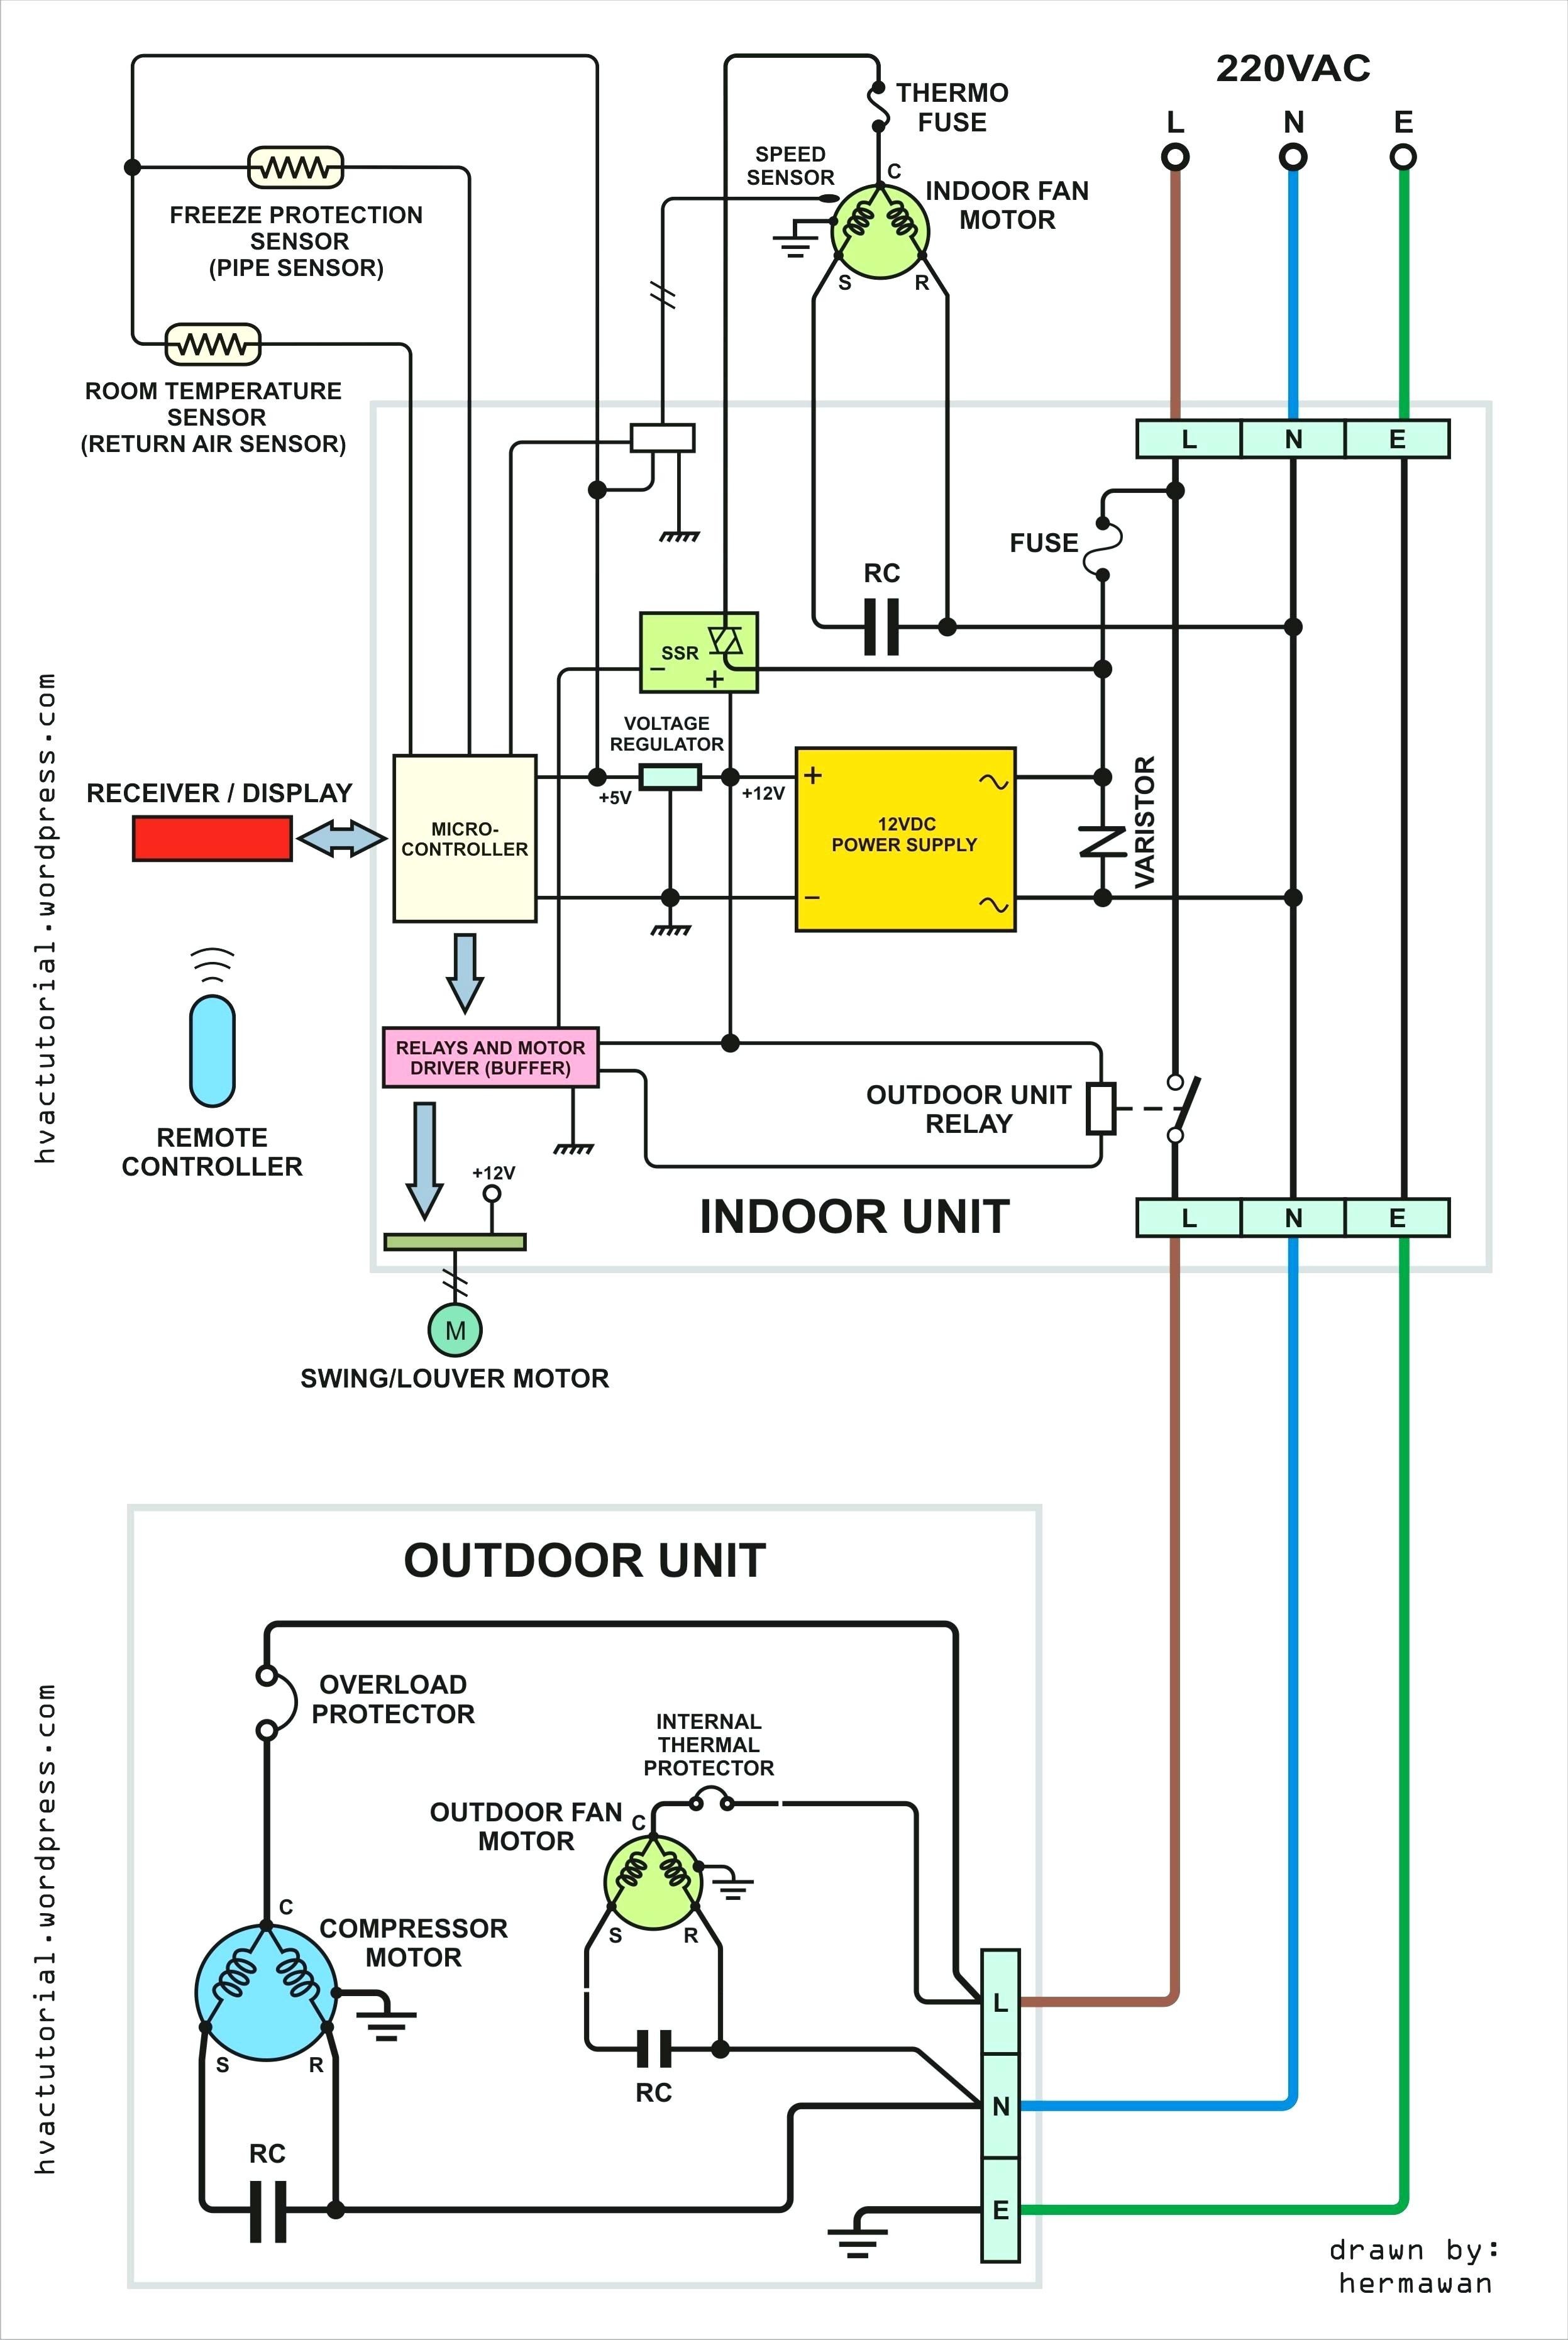 Paragon Timer Wiring Diagram Heater with thermostat Schematic Symbol Get Free Image About Wiring Of Paragon Timer Wiring Diagram